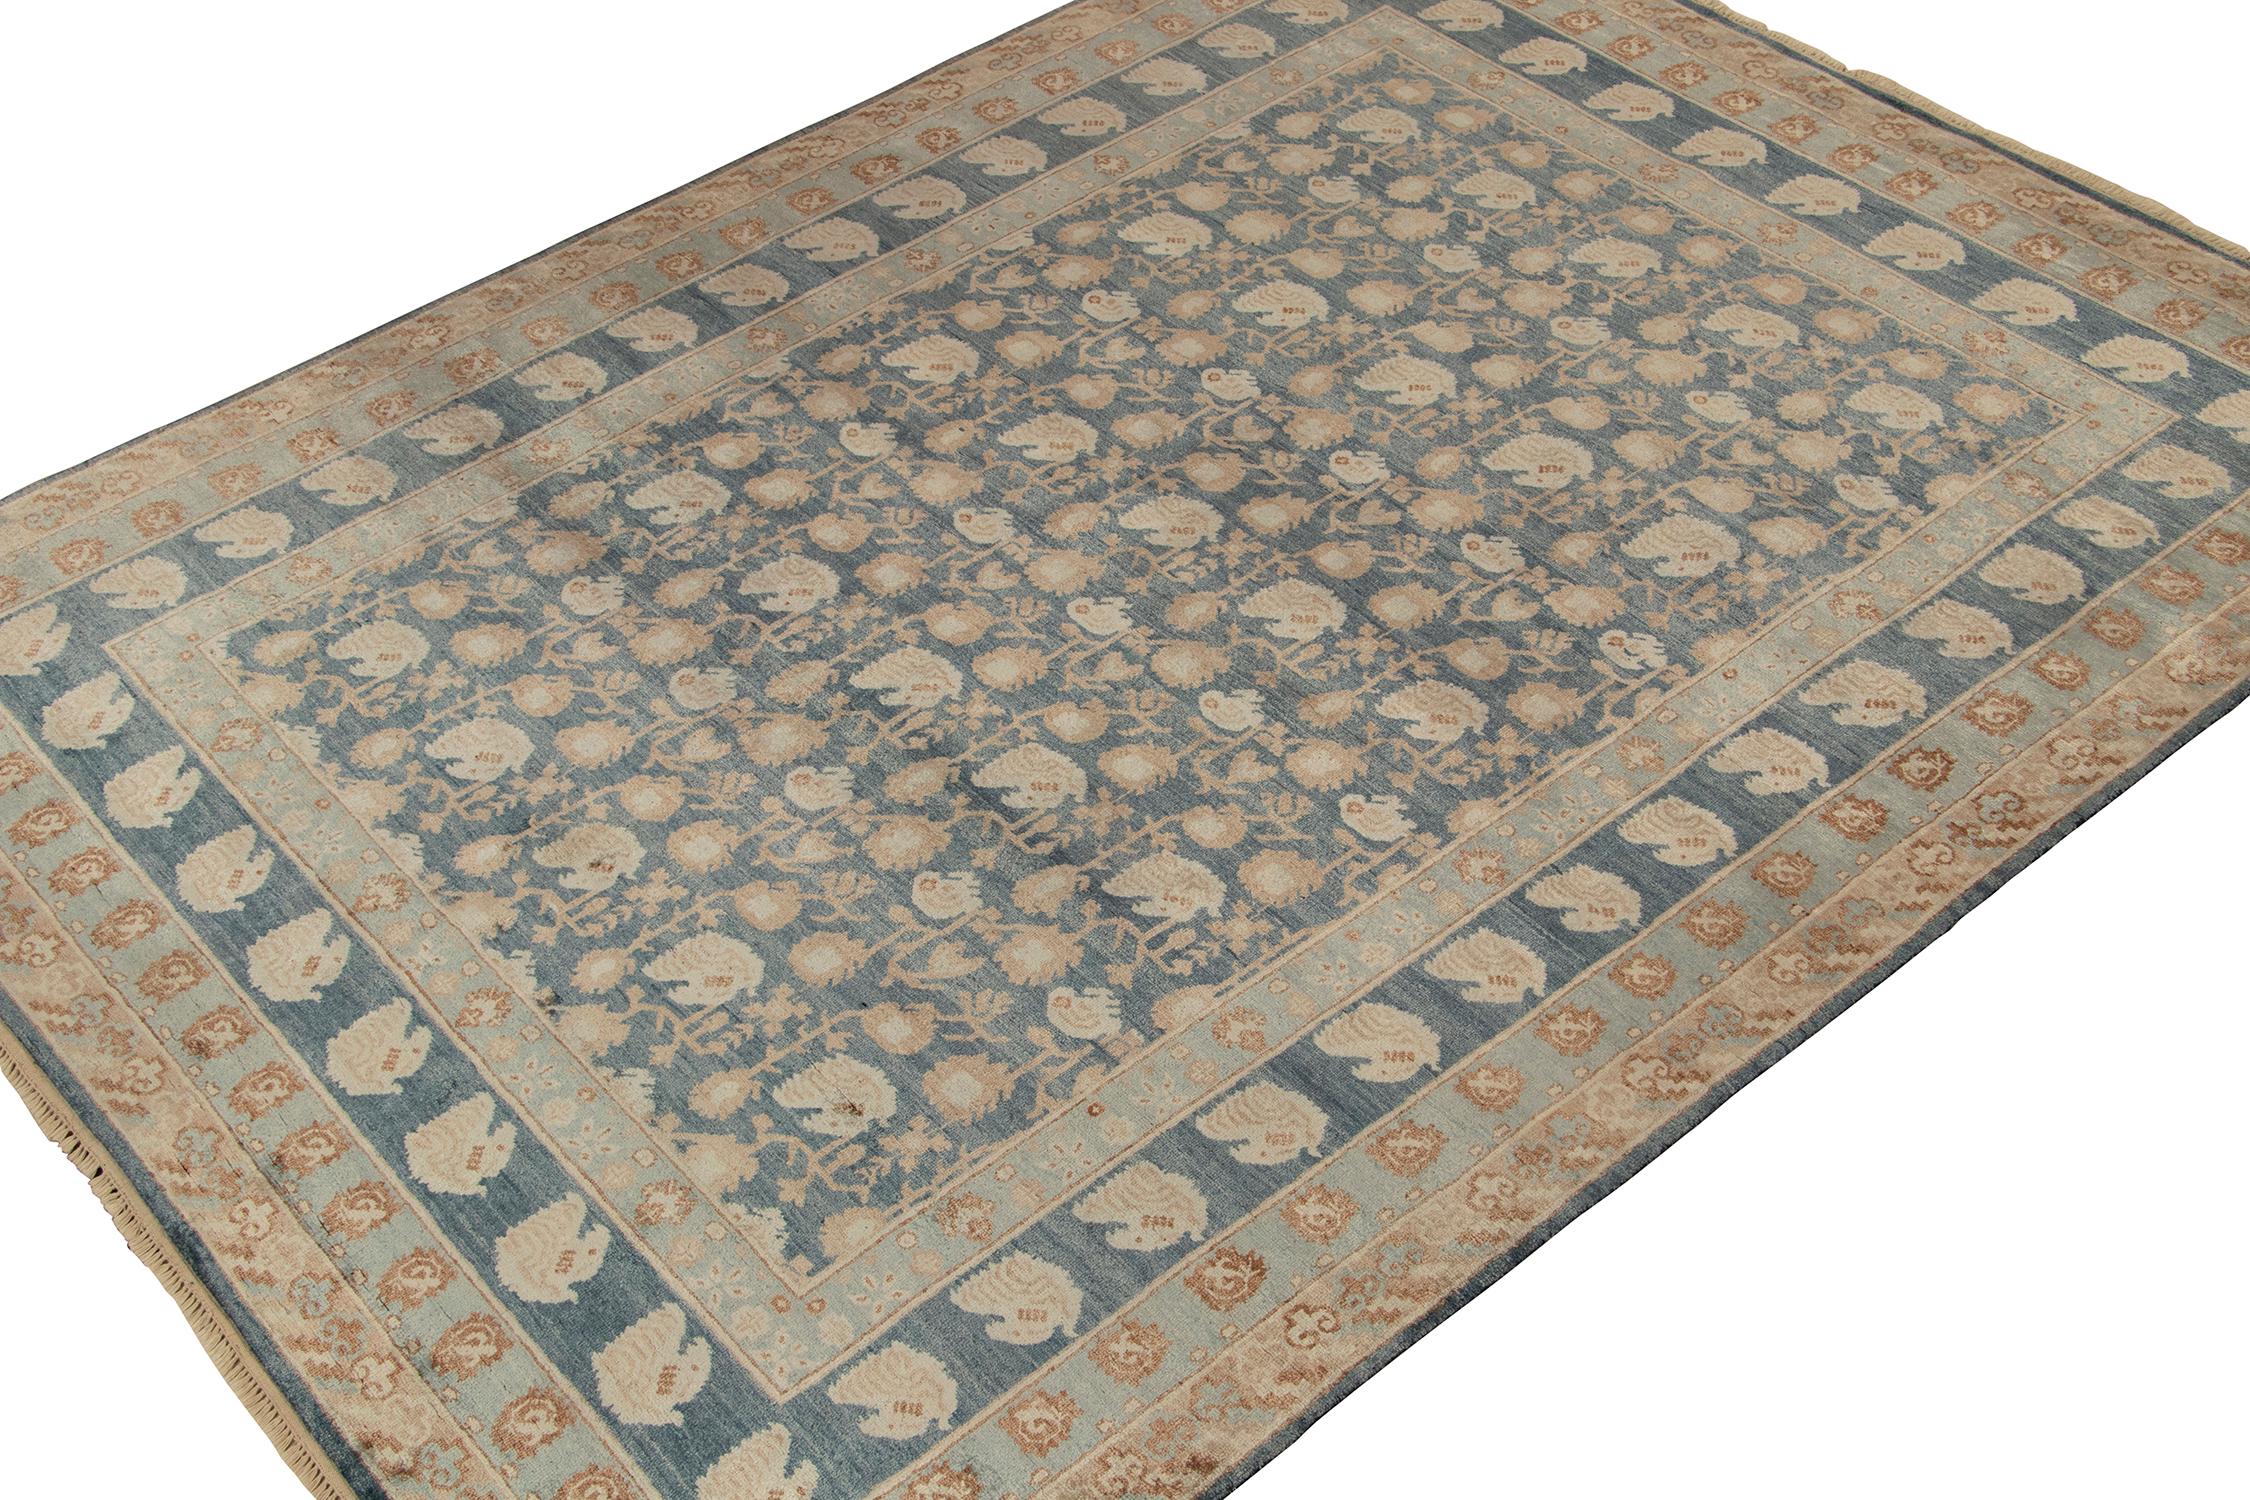 An 8x10 rug inspired by one of the most unusual classic patterns, from Rug & Kilim’s Modern Classics Collection. Hand-knotted in wool and silk, playing exceptional tones of modern blue beside beige-brown in patterns with classic grace.
Further On